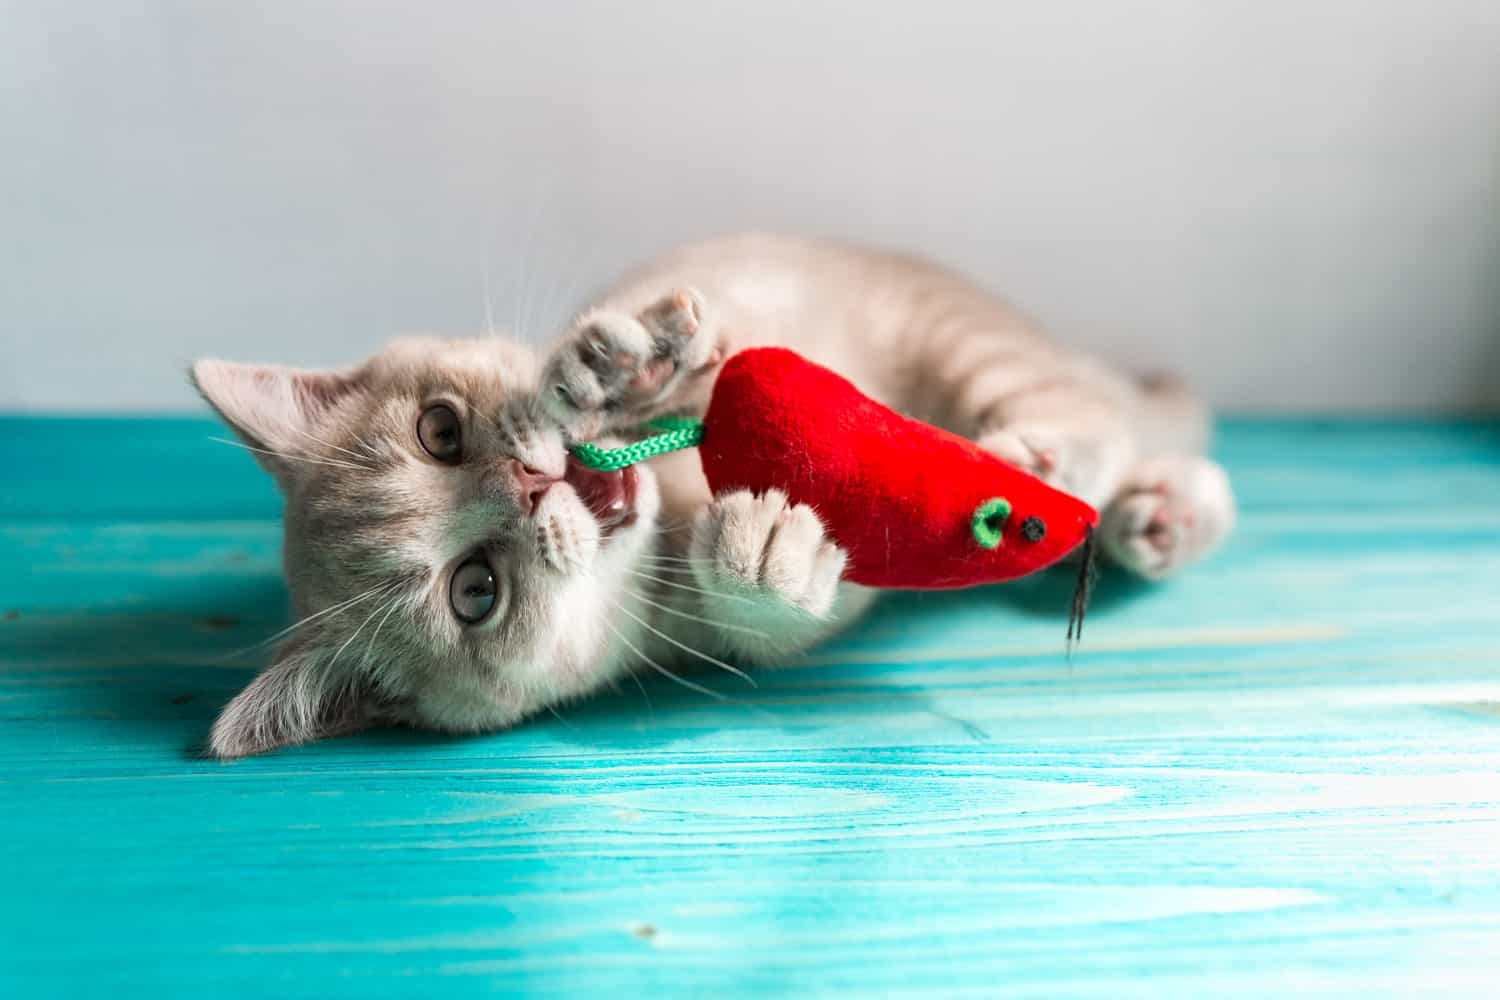 A cute little cat chewing his chew toy